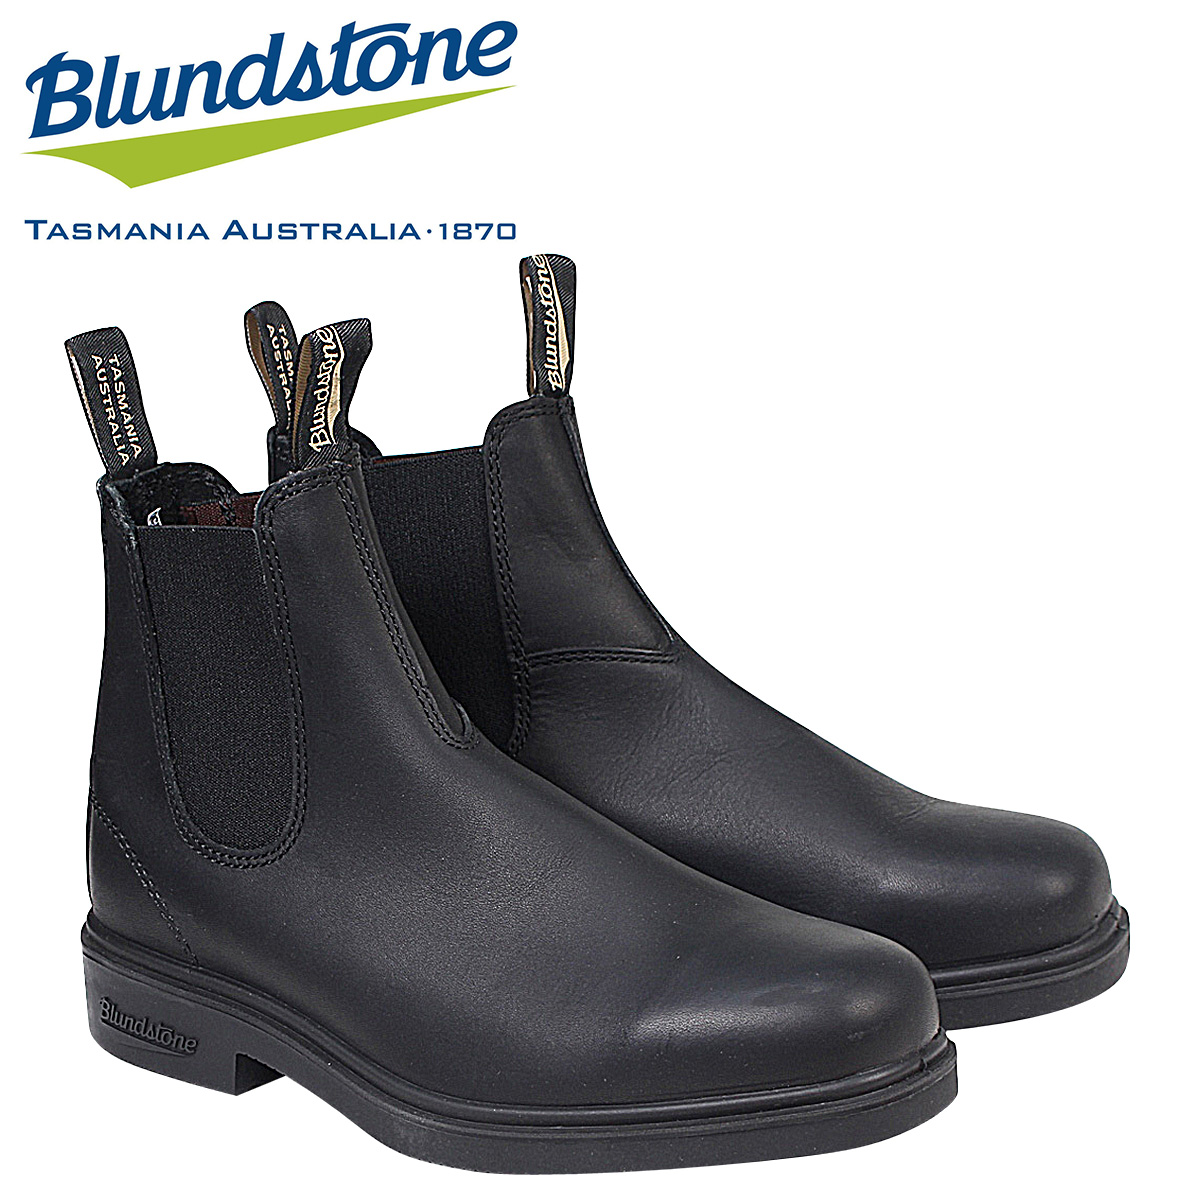 blundstone boots 063